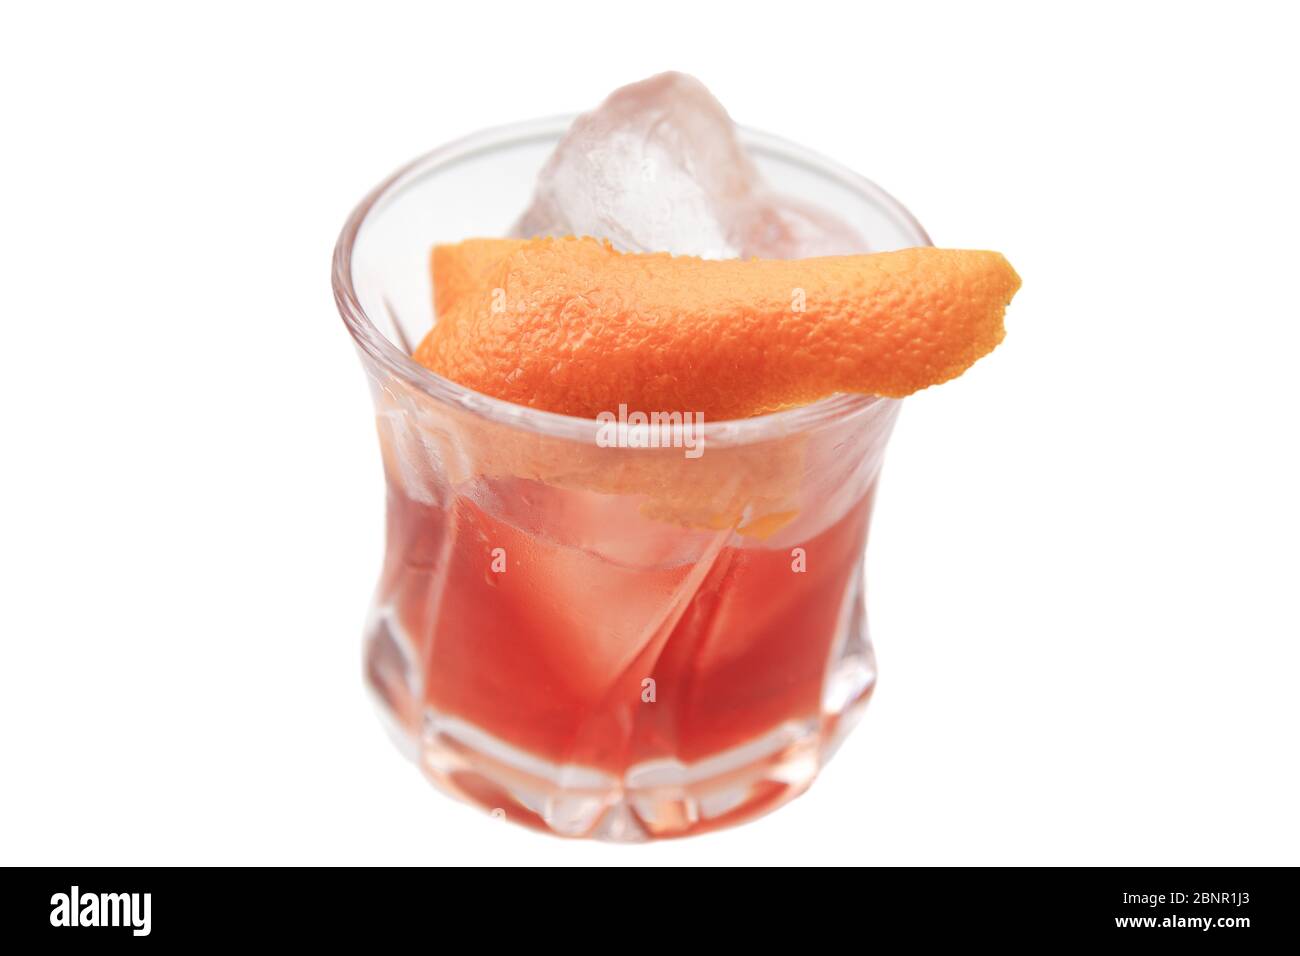 https://c8.alamy.com/comp/2BNR1J3/reddish-brown-cocktail-in-a-rocks-glass-on-an-isolated-white-background-the-cocktail-is-garnished-with-an-orange-twist-and-hand-cut-ice-2BNR1J3.jpg